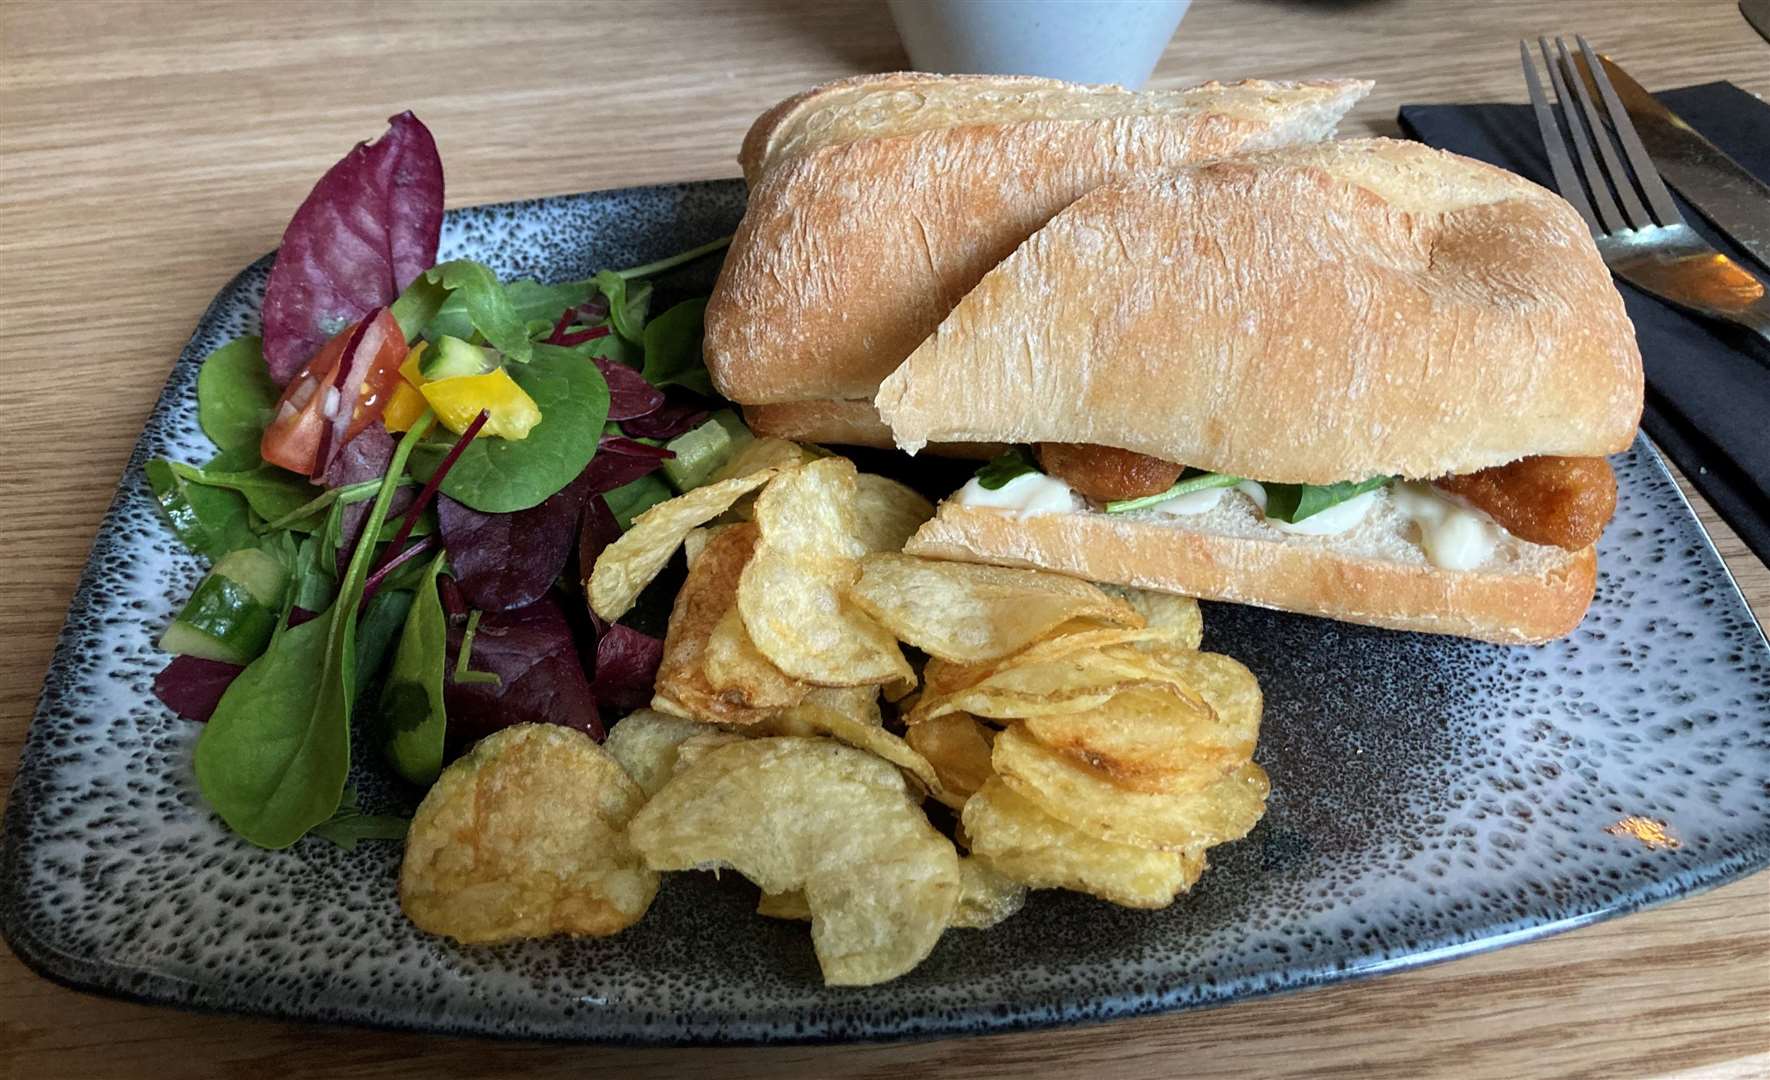 Mrs SD does love a fish finger sandwich – this one was also served on ciabatta and cost £8